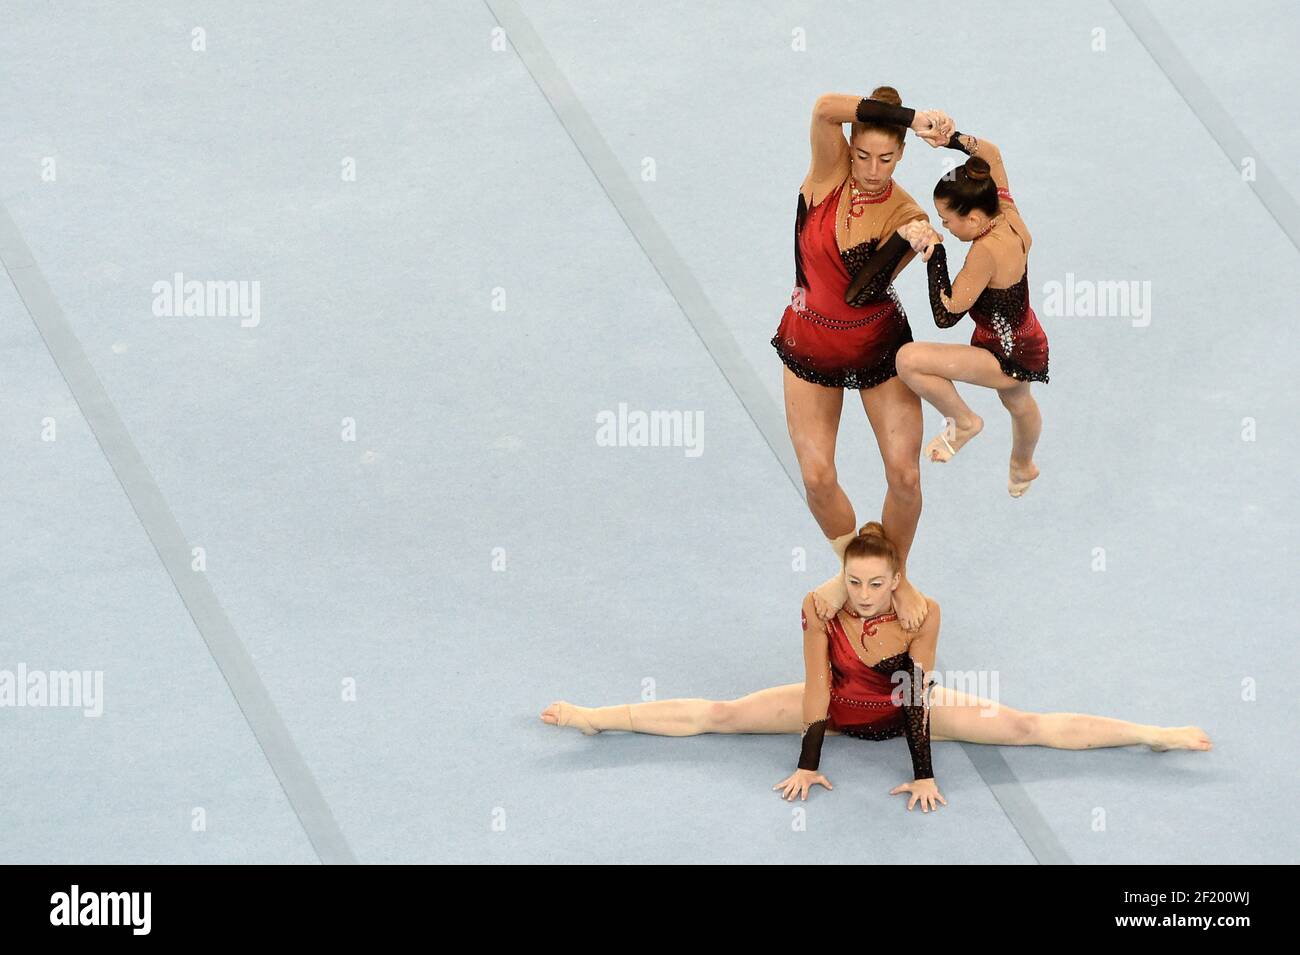 Tiphanie Bonnet, Agathe Meunier, Laura Viaud compete in Gymnastics Acrobatic women's group during the 1st European Olympic Games 2015 in Baku, Azerbaijan, Day 7, on June 19, 2015 - Photo Philippe Millereau / KMSP / DPPI Stock Photo